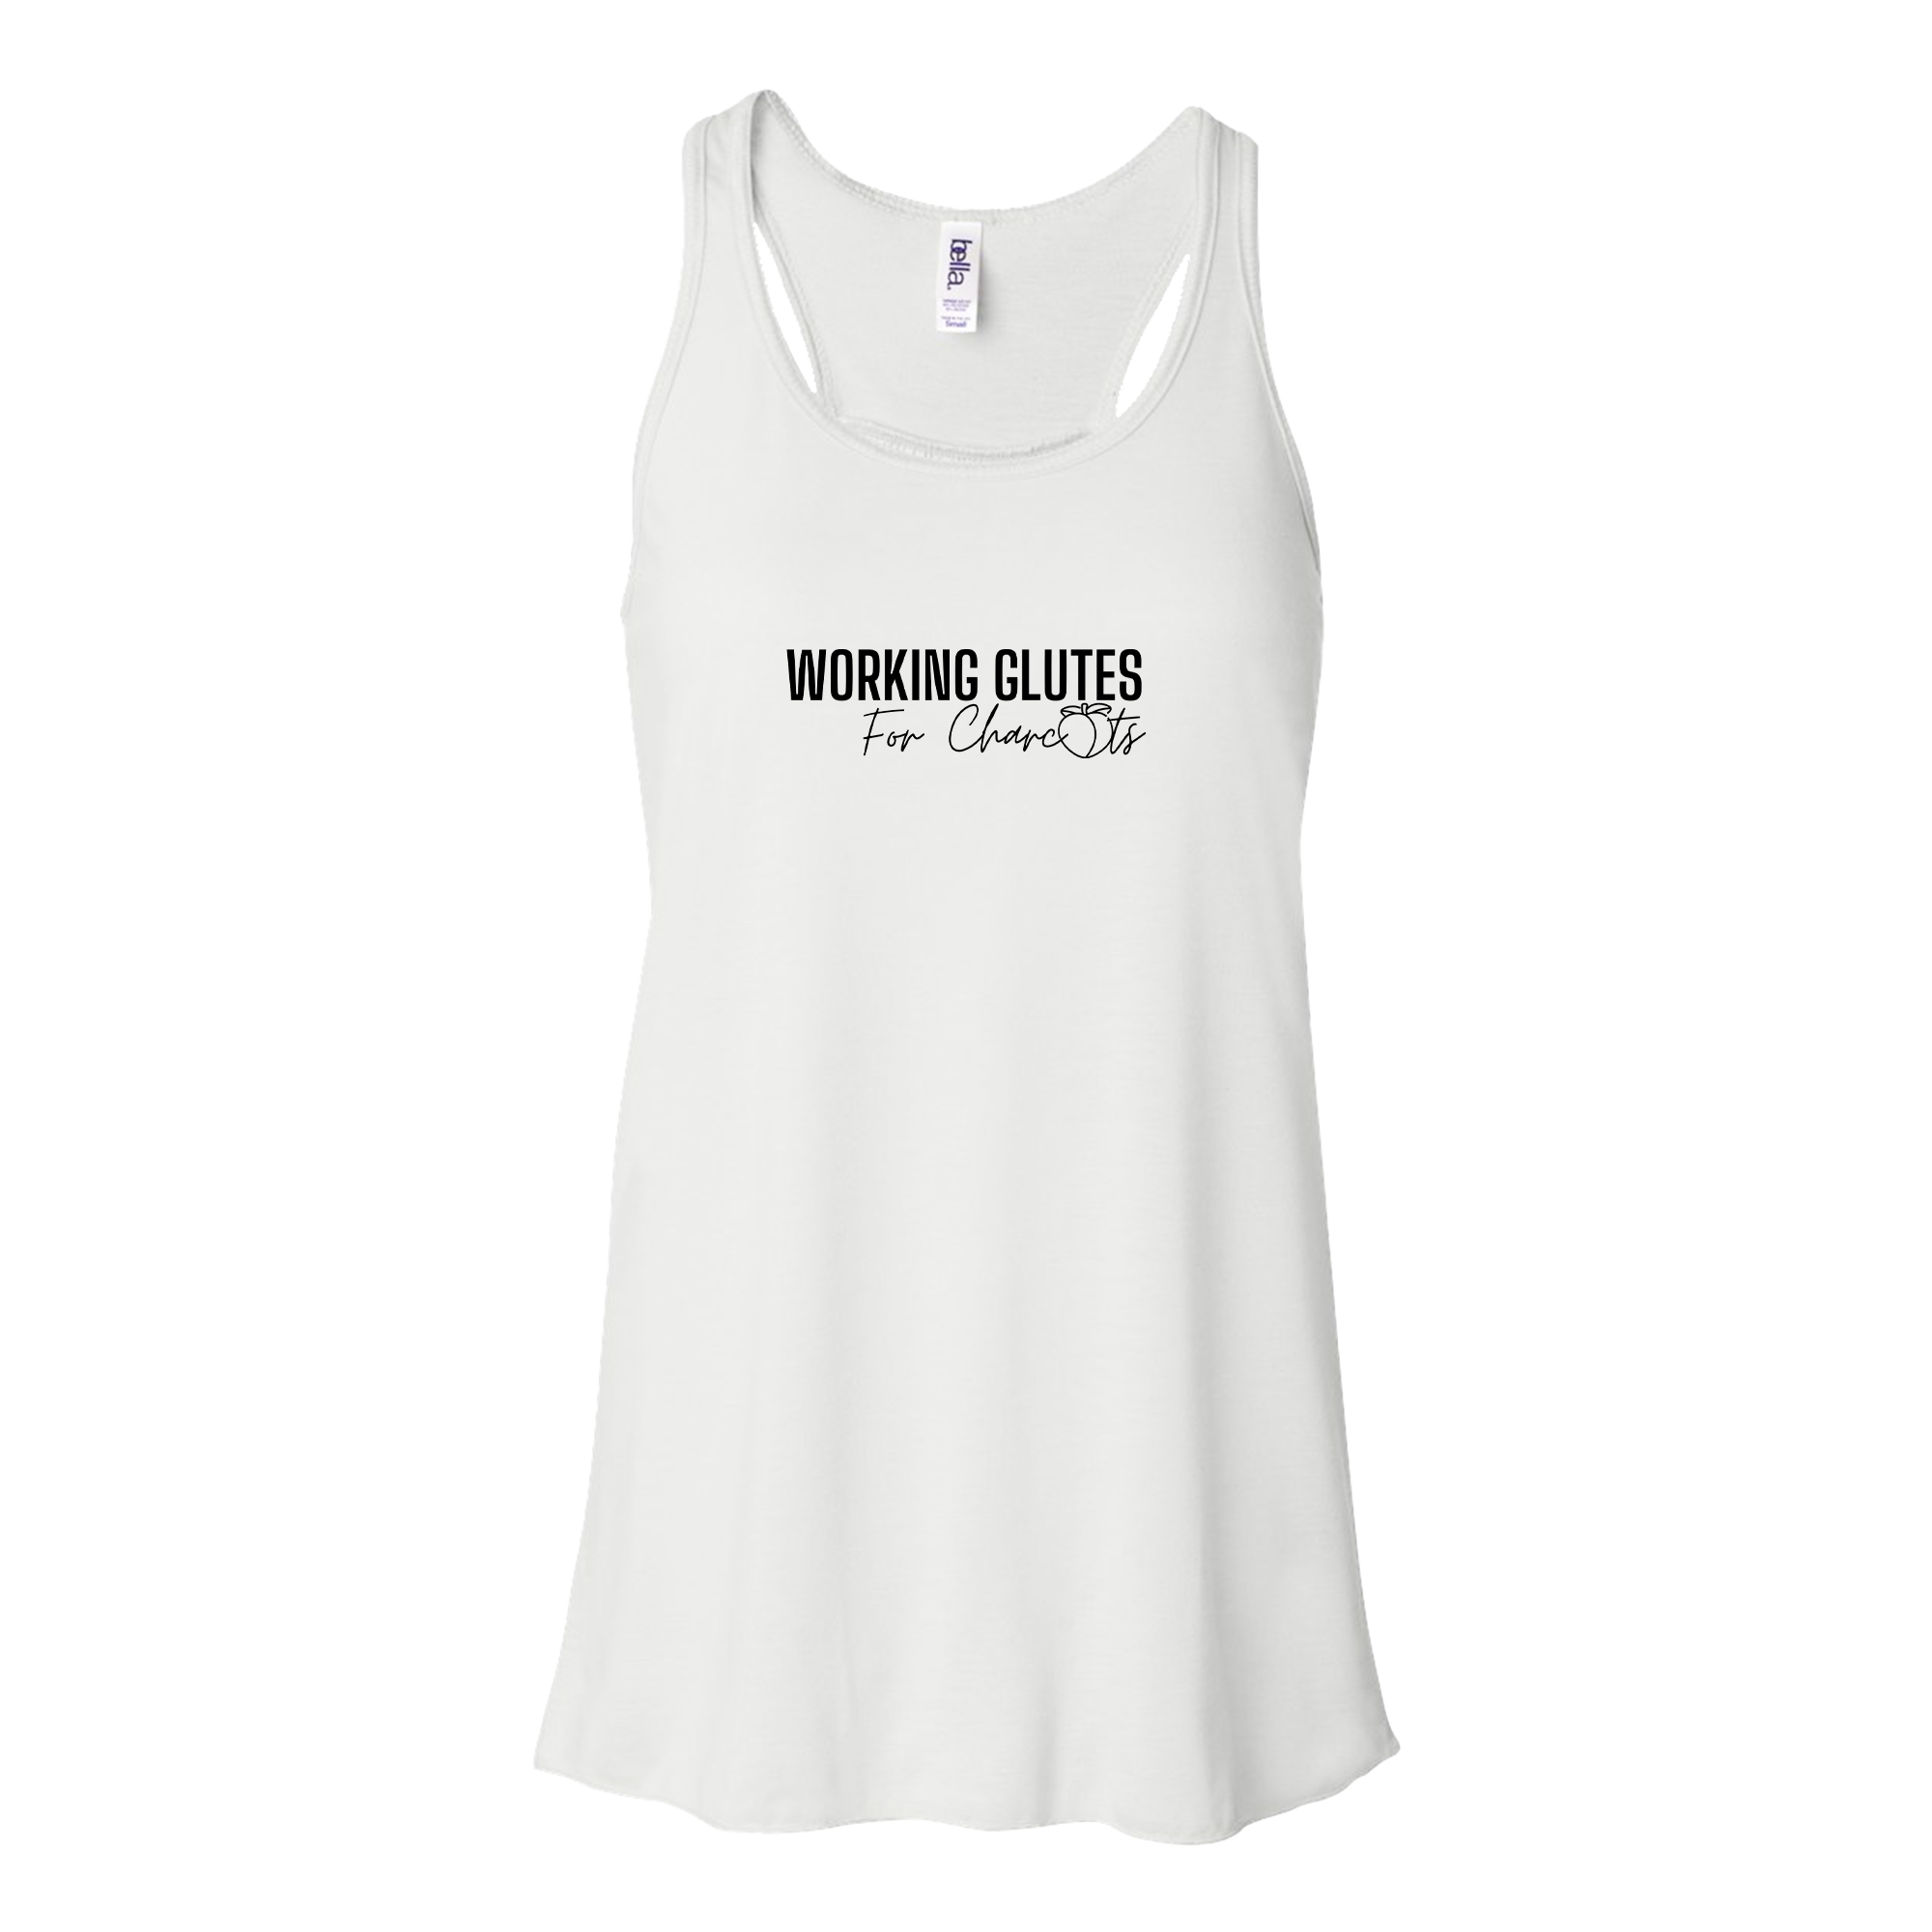 Kevin Cooney - Glutes for Charcuuts Women's Tank Top